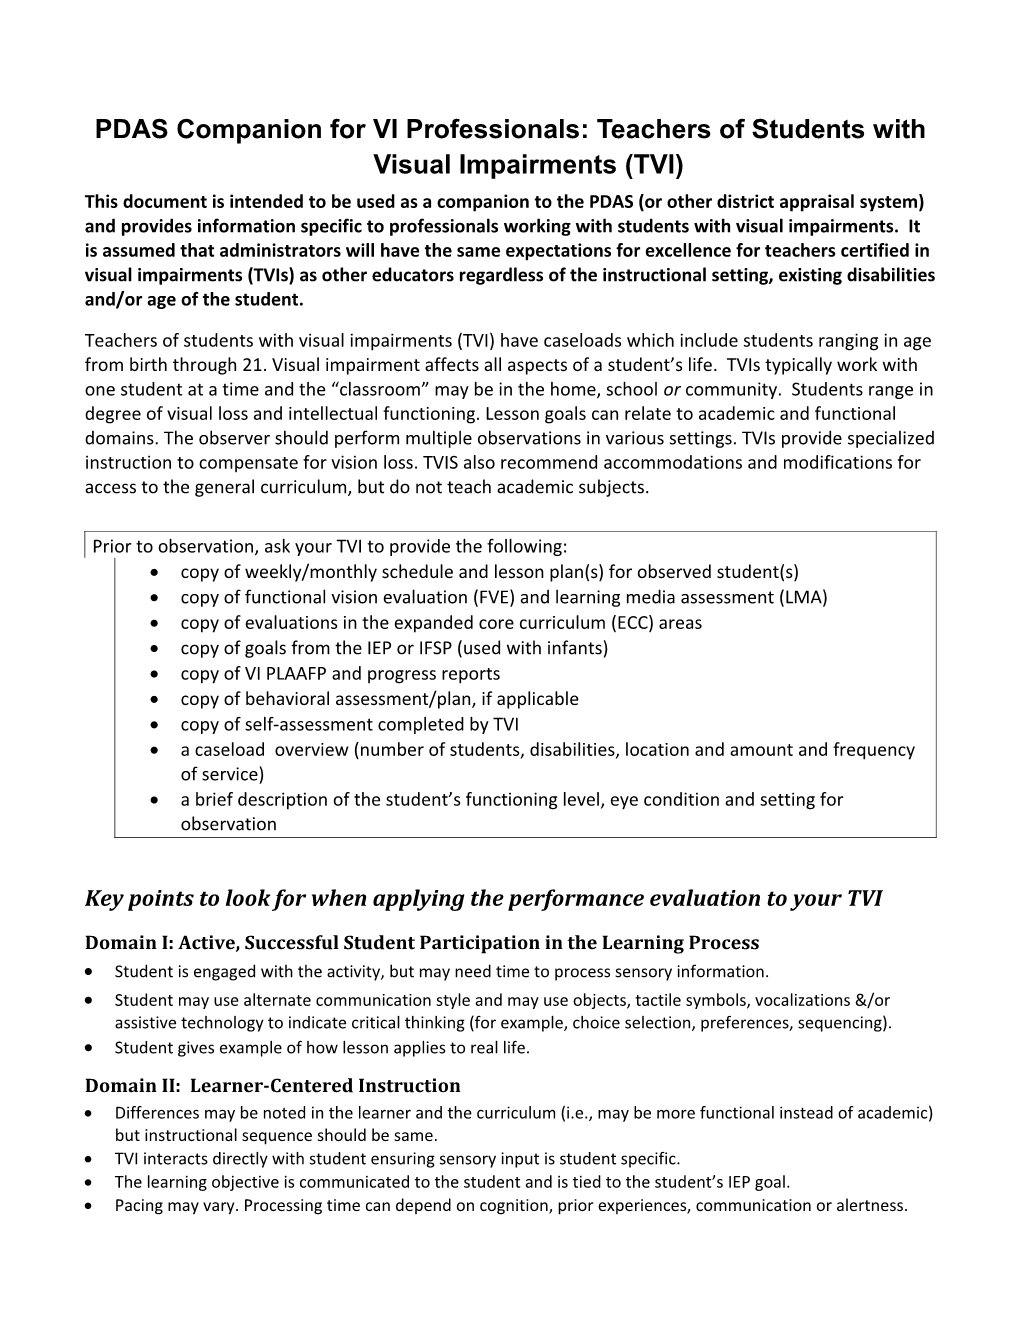 PDAS Companion for VI Professionals: Teachers of Students with Visual Impairments (TVI)